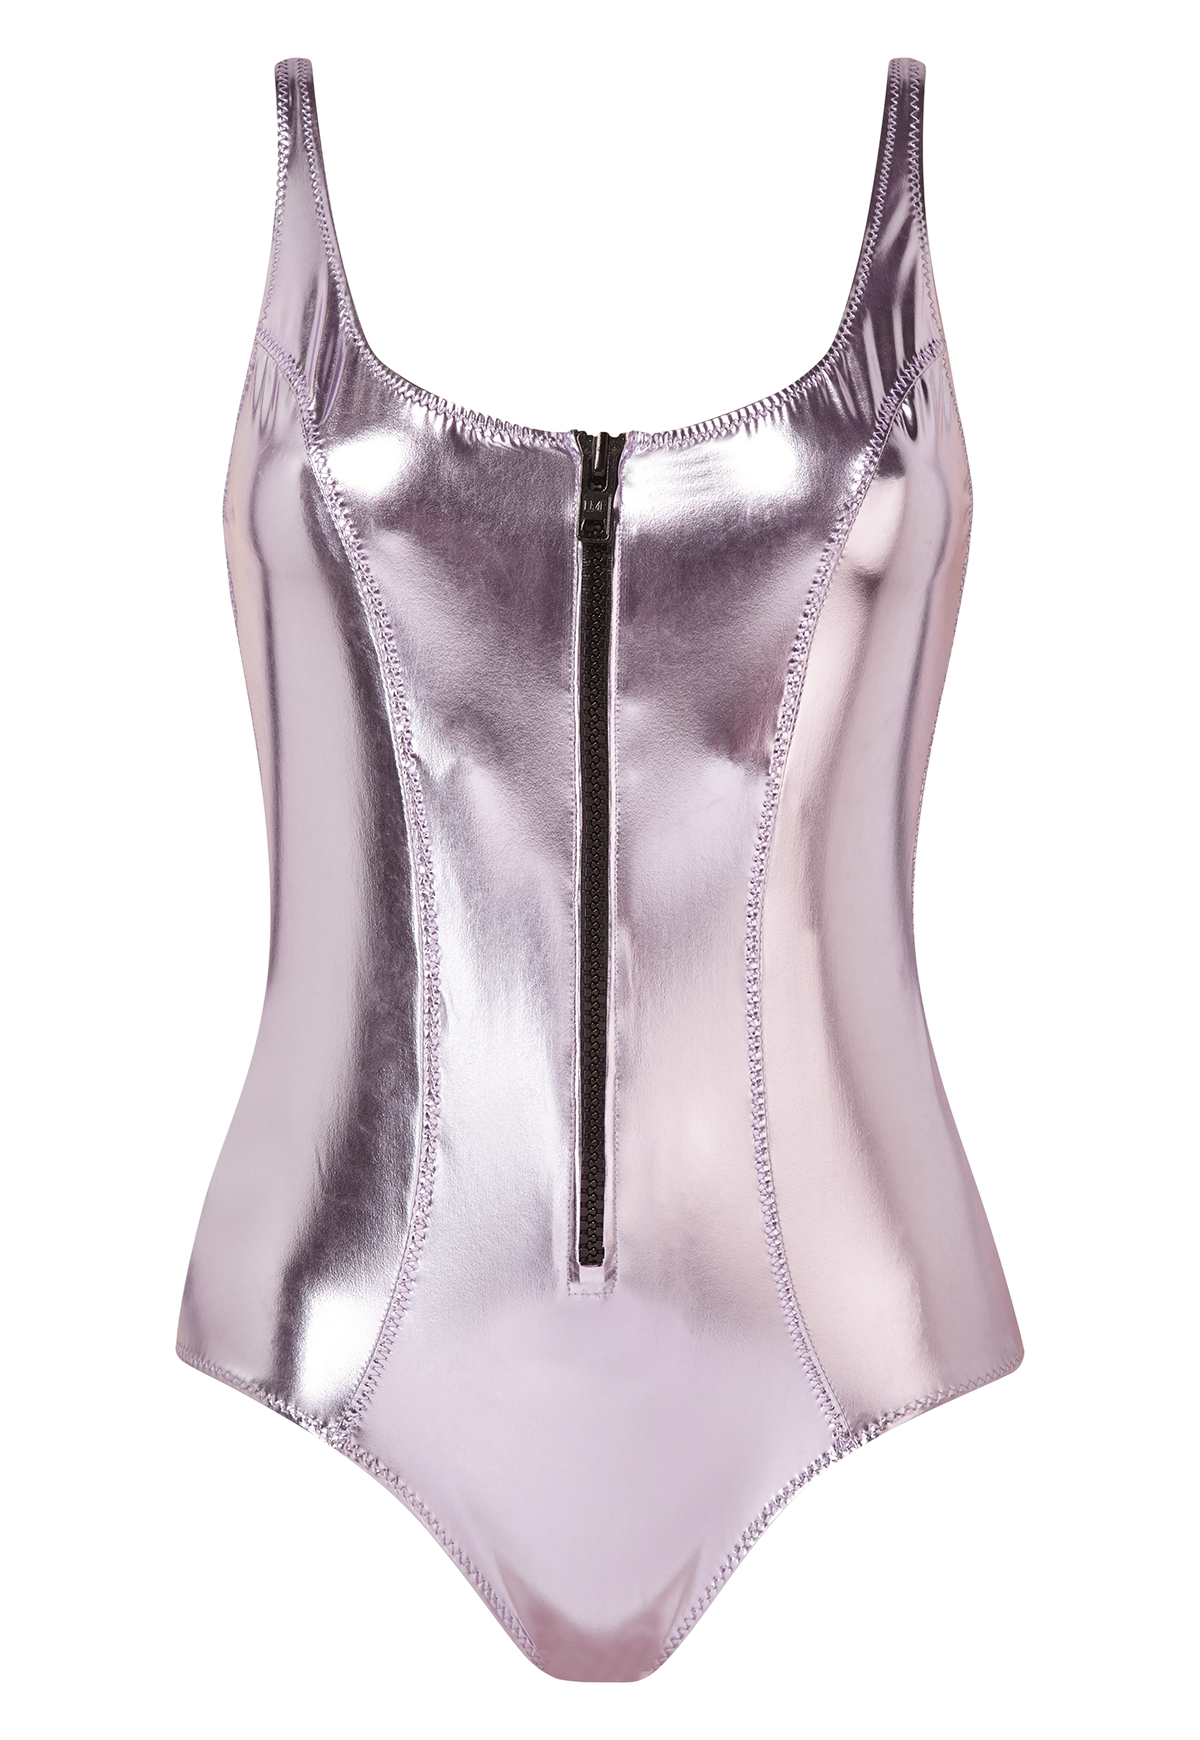 THE JASMINE MAILLOT in LAVENDER PVC